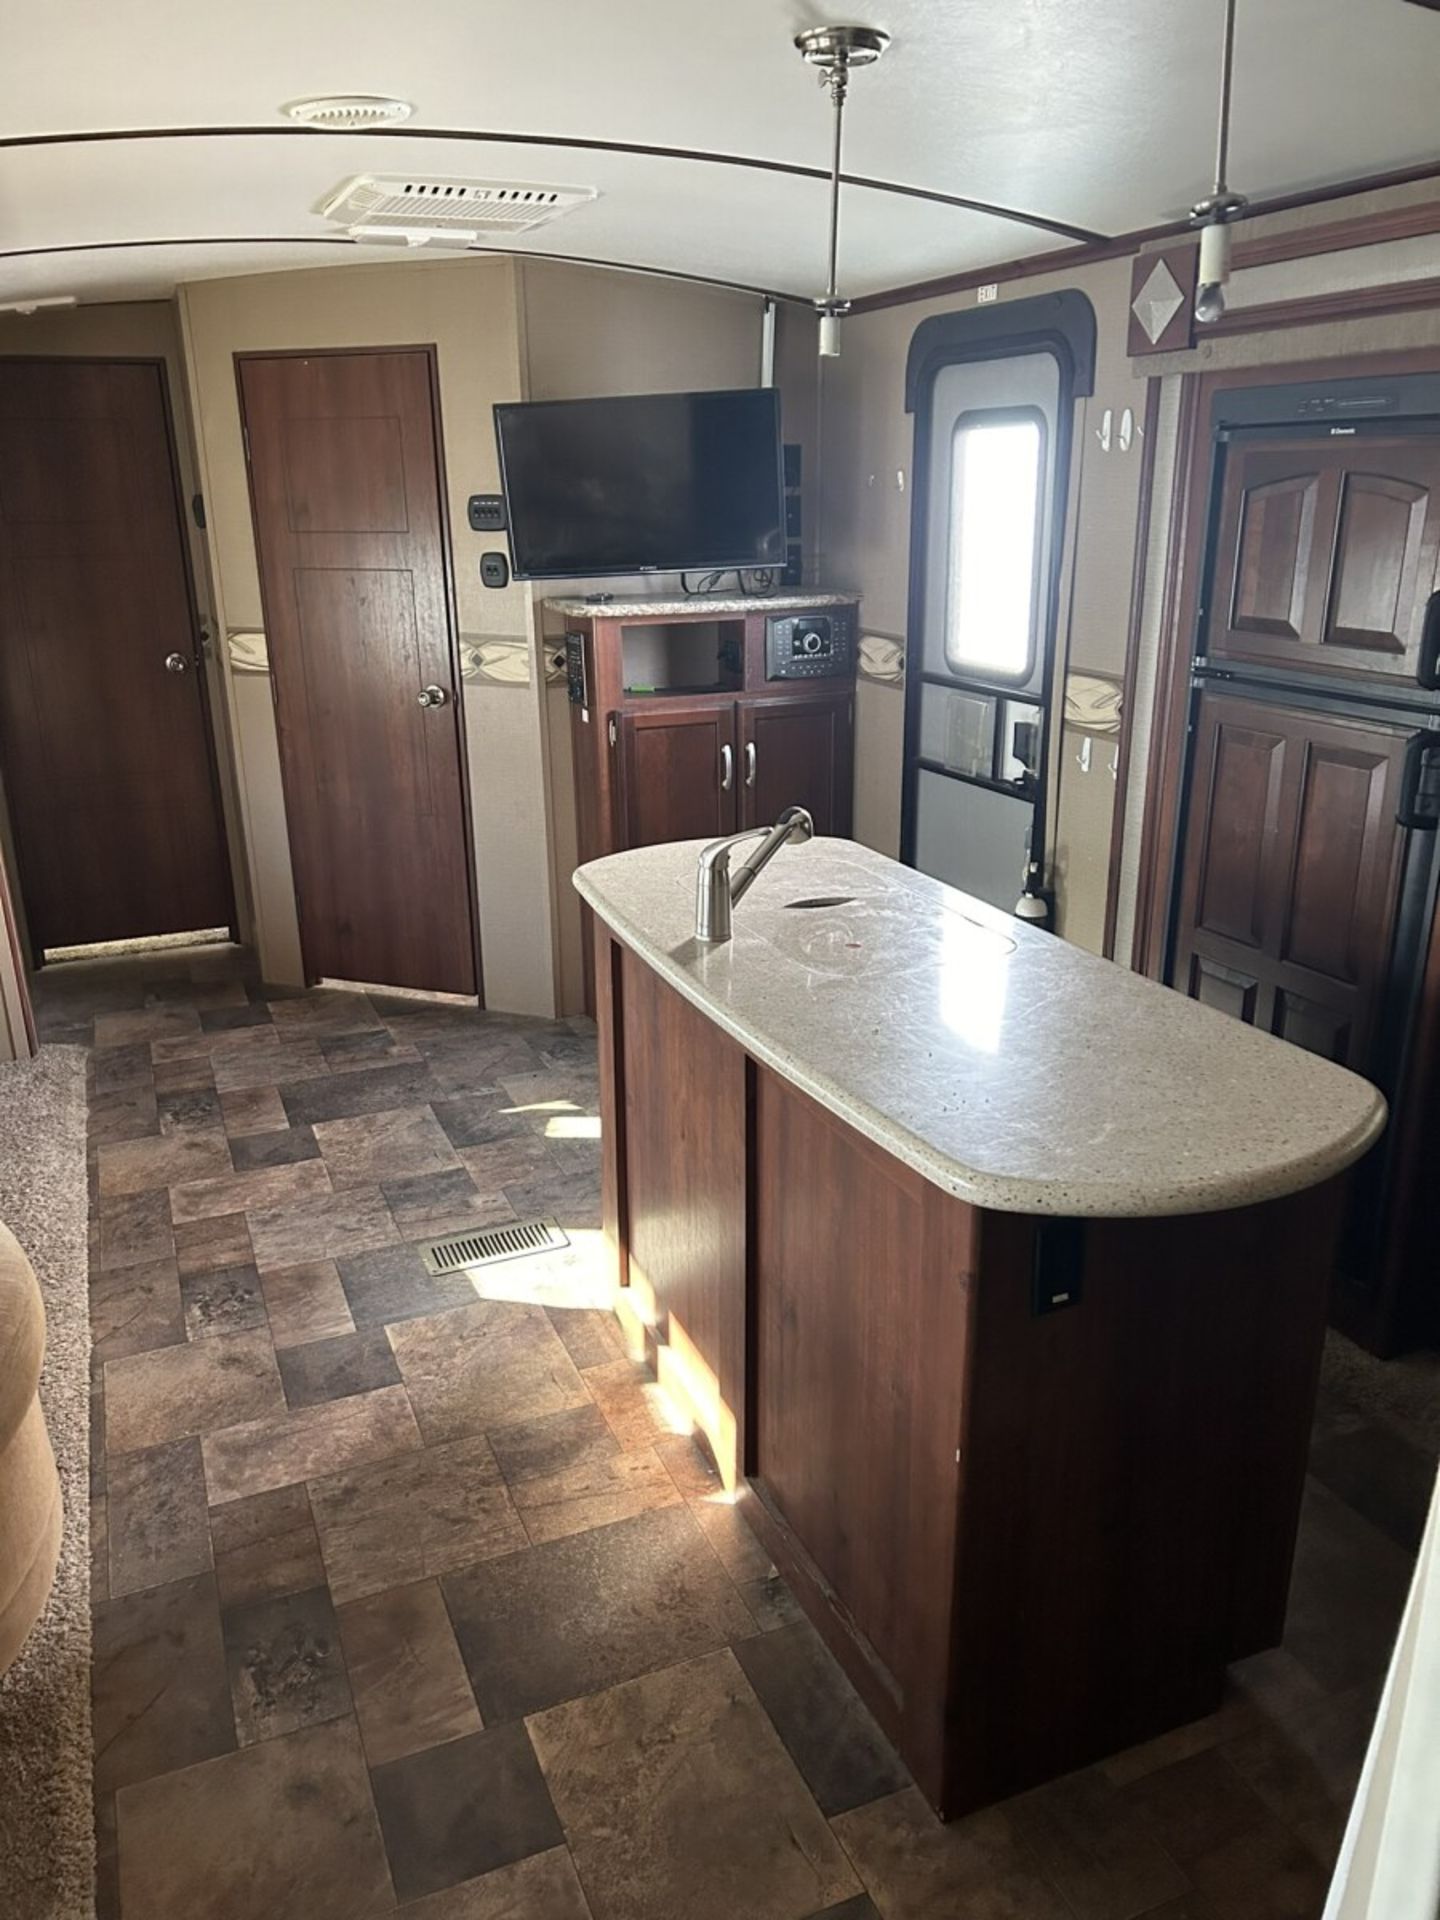 2014 OUTBACK KEYSTONE SUPER-LITE 33 FT HOLIDAY TRAILER, DOUBLE SLIDE, POWER AWNING, OUTDOOR KITCHEN, - Image 8 of 15